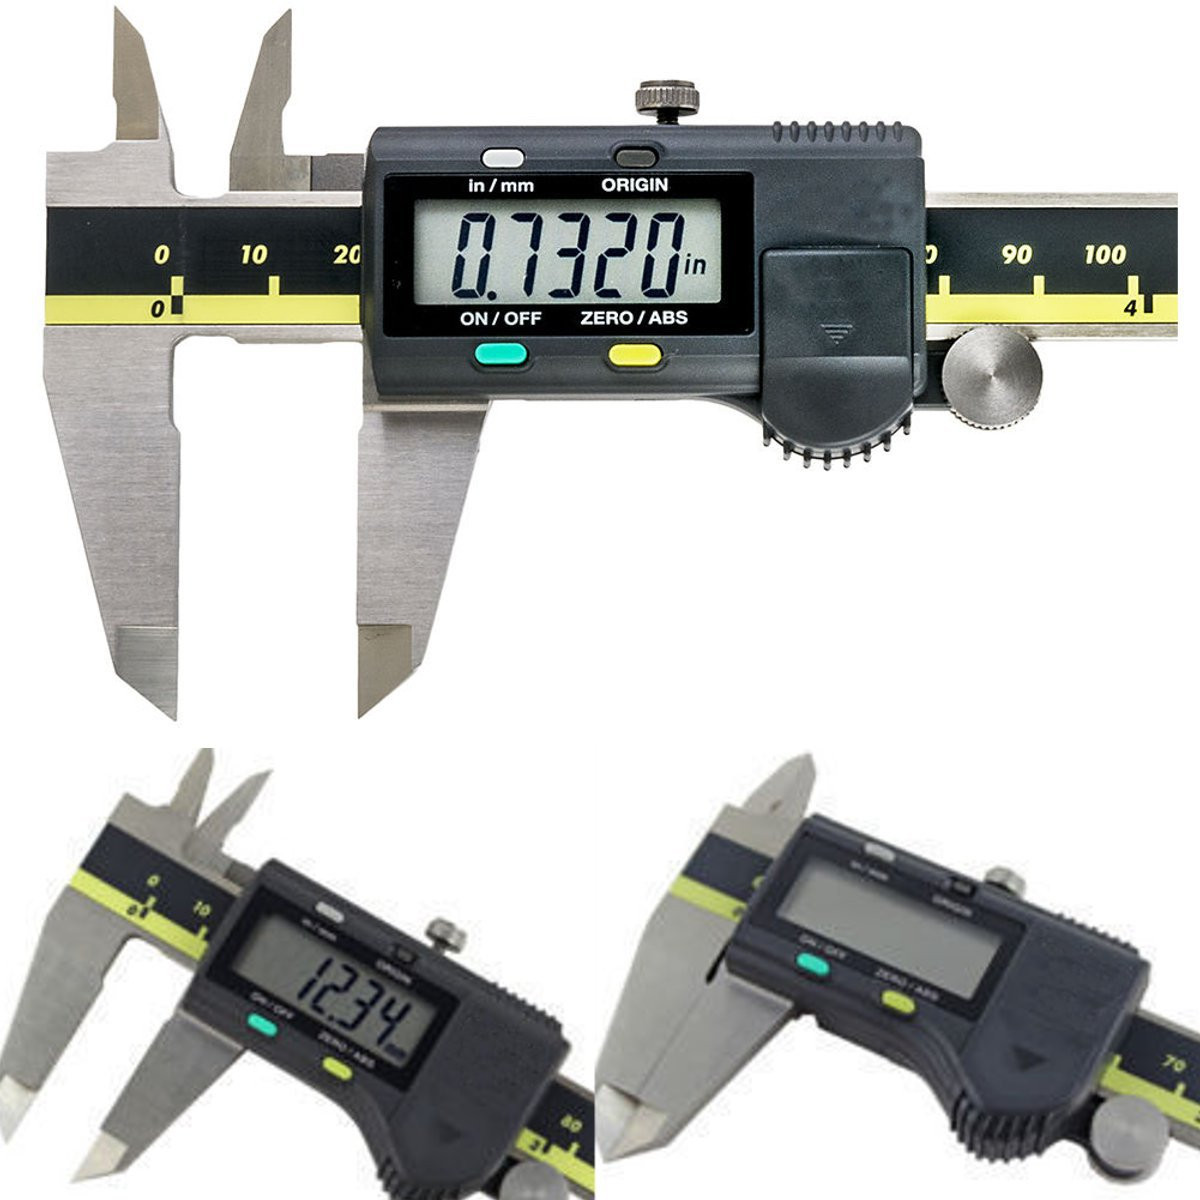 

150mm 6 Inch Stainless Steel Electronic Digital Vernier Caliper Micrometer With Box